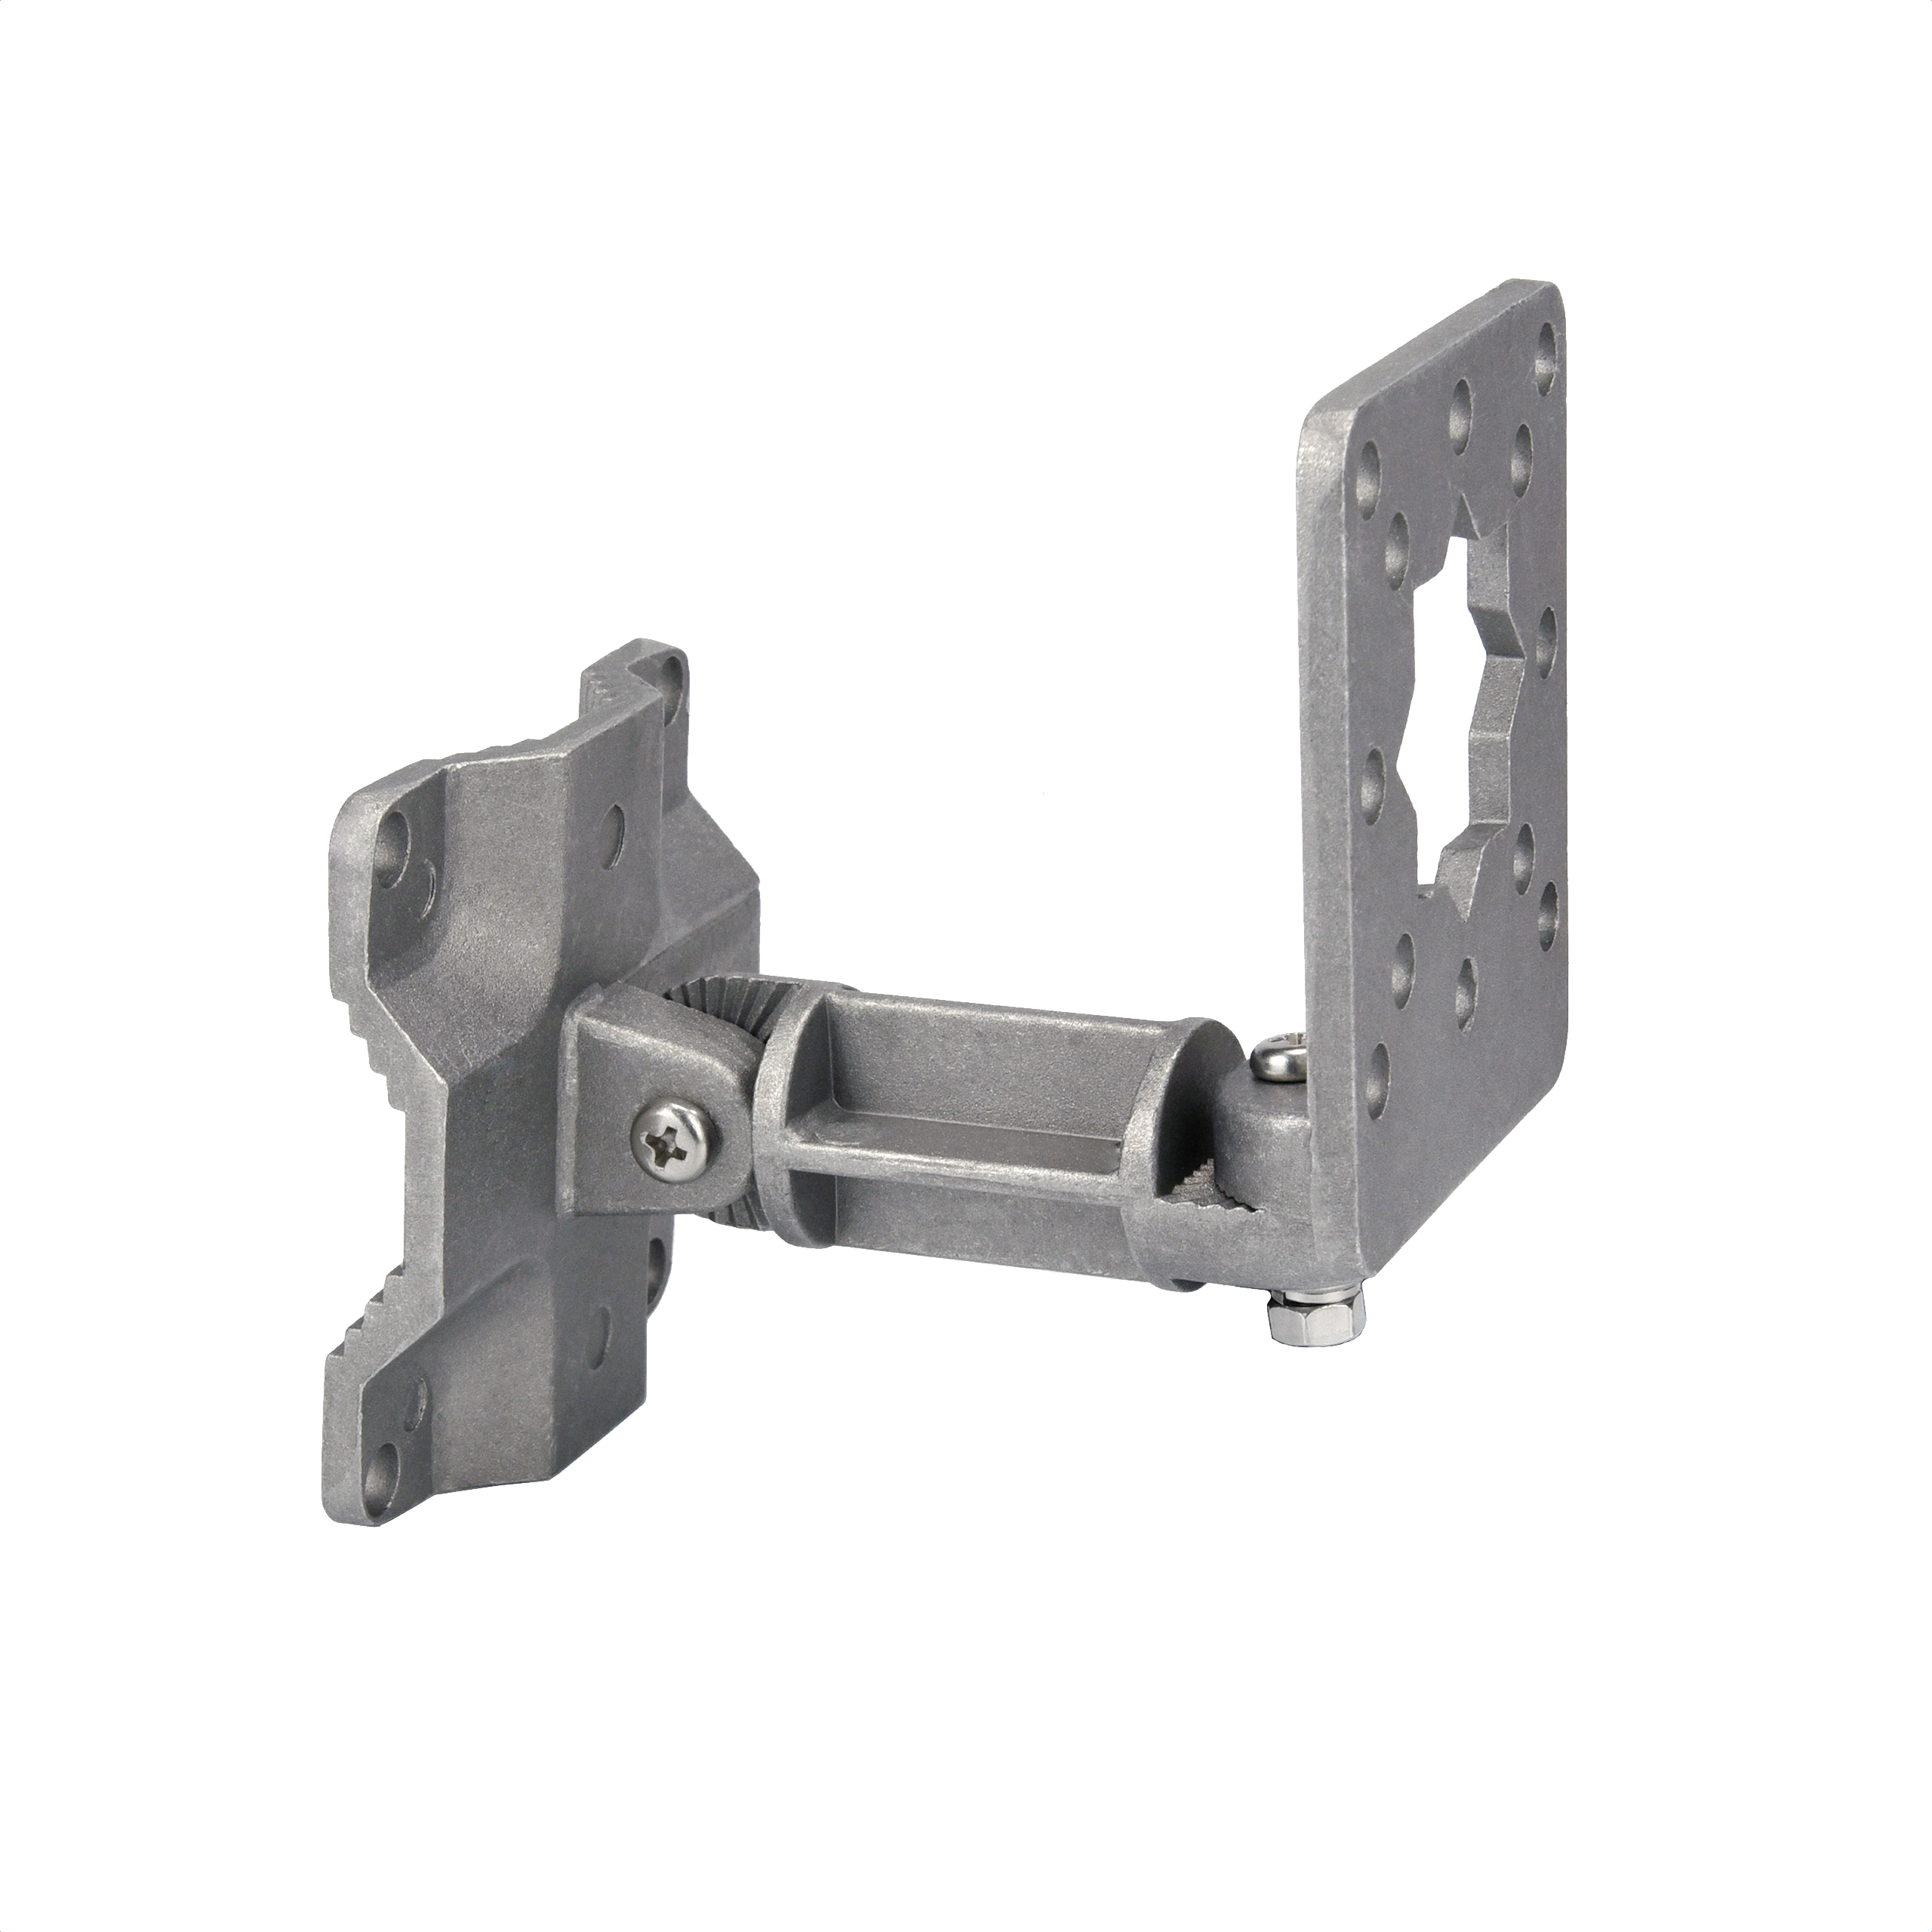 Universal Wall/Pole Mount Adjustable Articulated Bracket - Proxicast